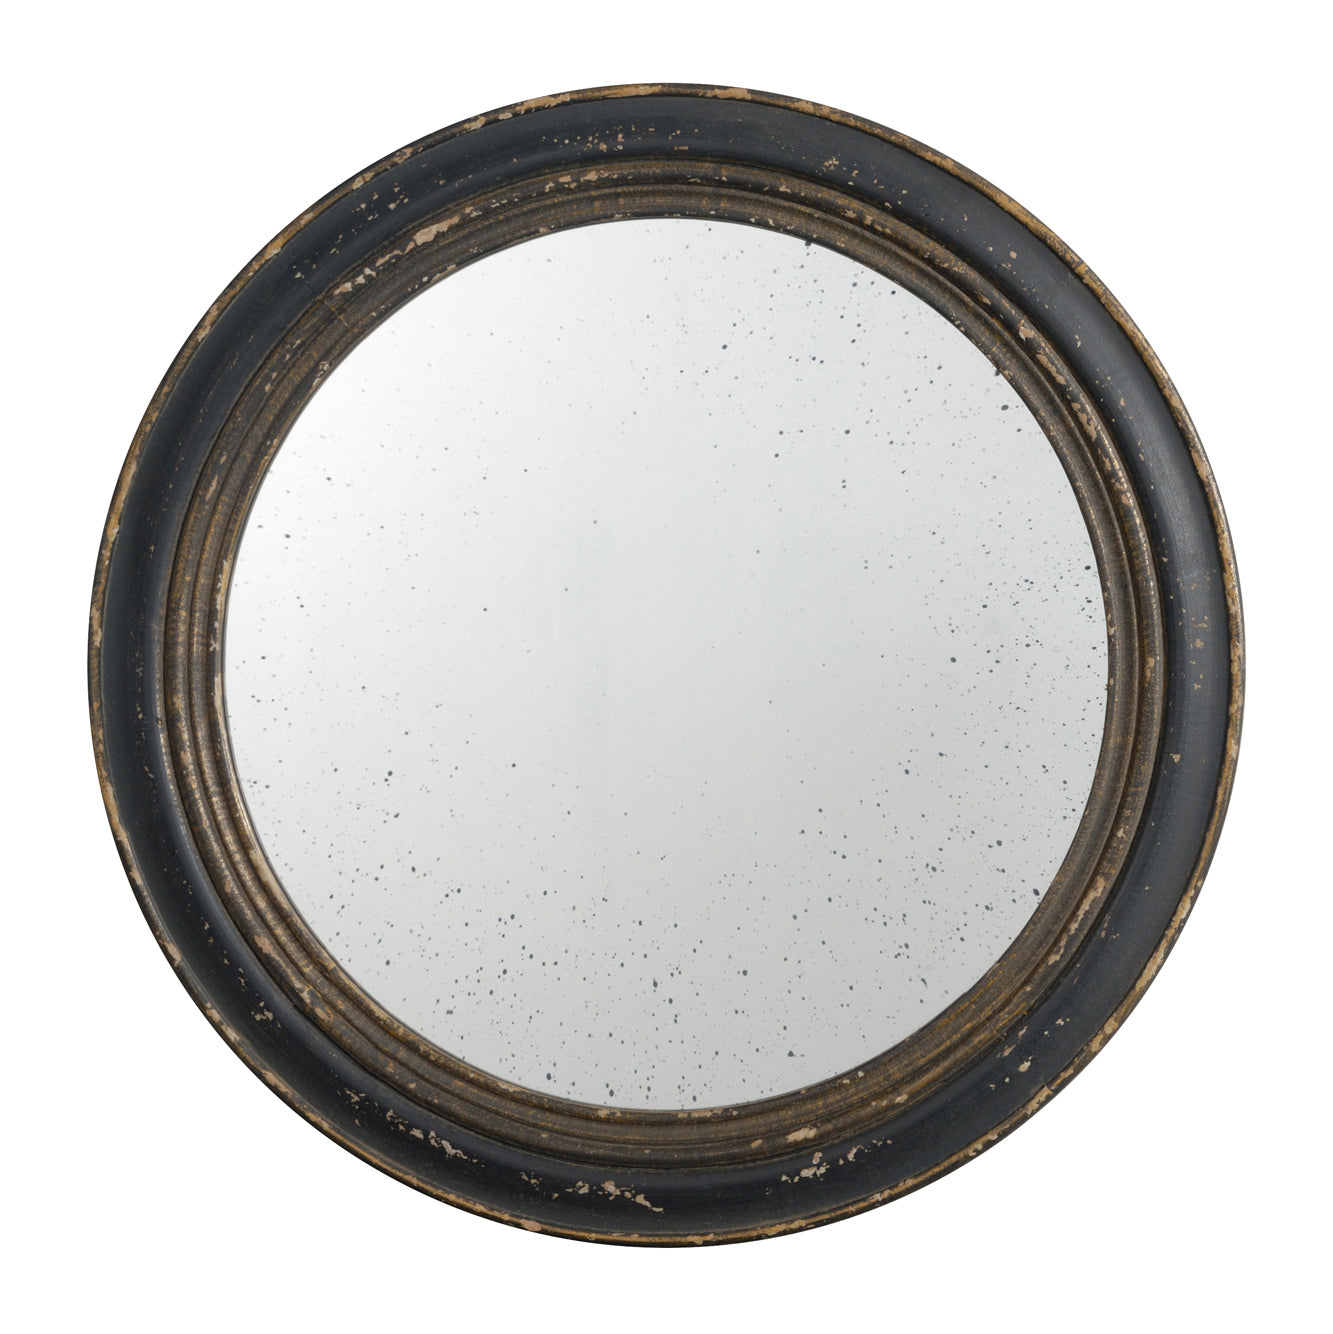 23.5" Circle Wall Mirror with Wooden Black Frame